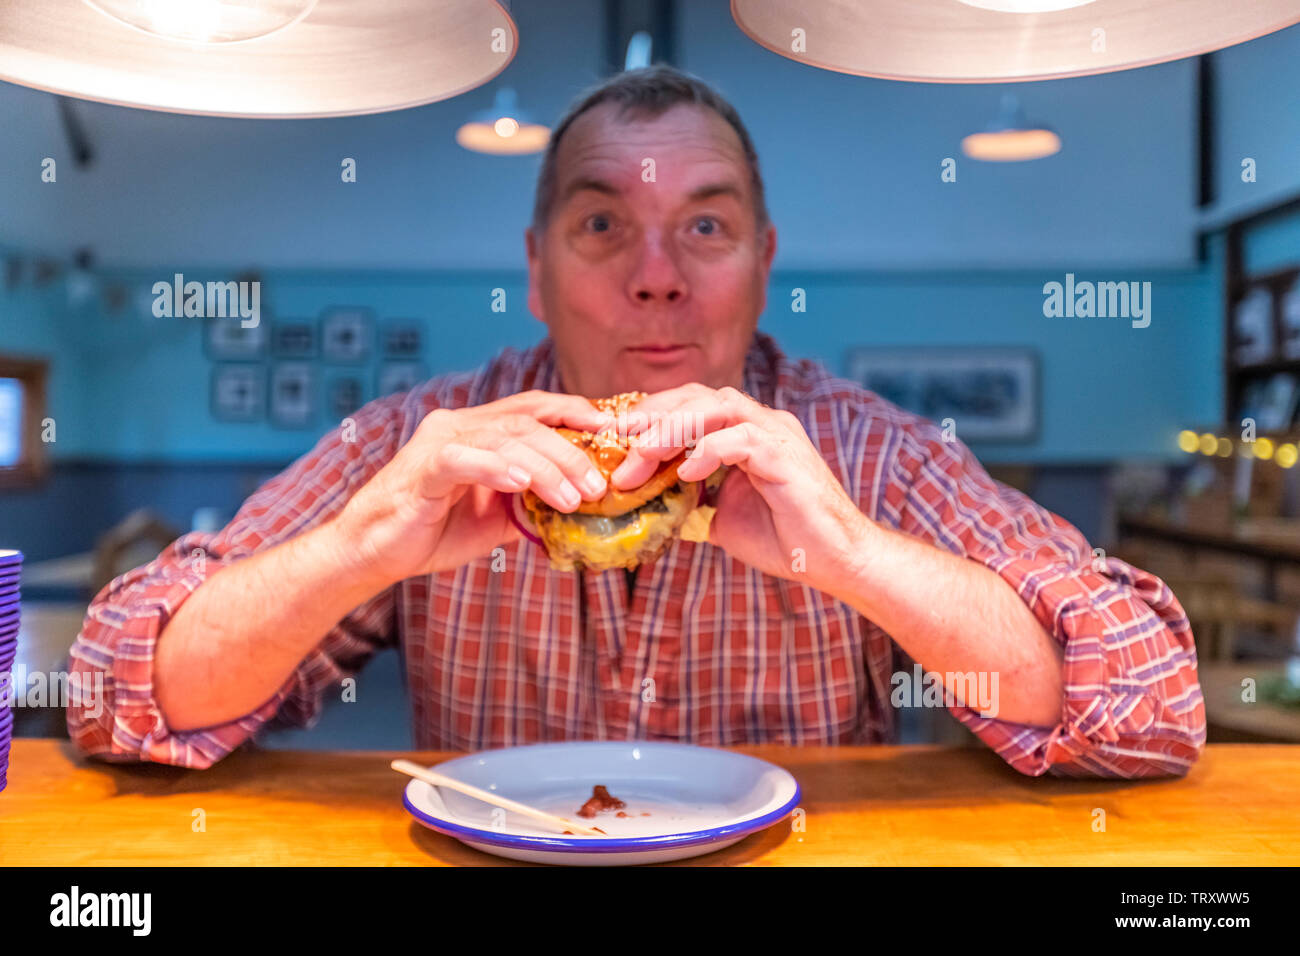 A man in a check shirt enjoys the signature burger at The Pig & Apple cafe. The cafe is based at Humble by Nature, Monmouthshire, Wales. Stock Photo